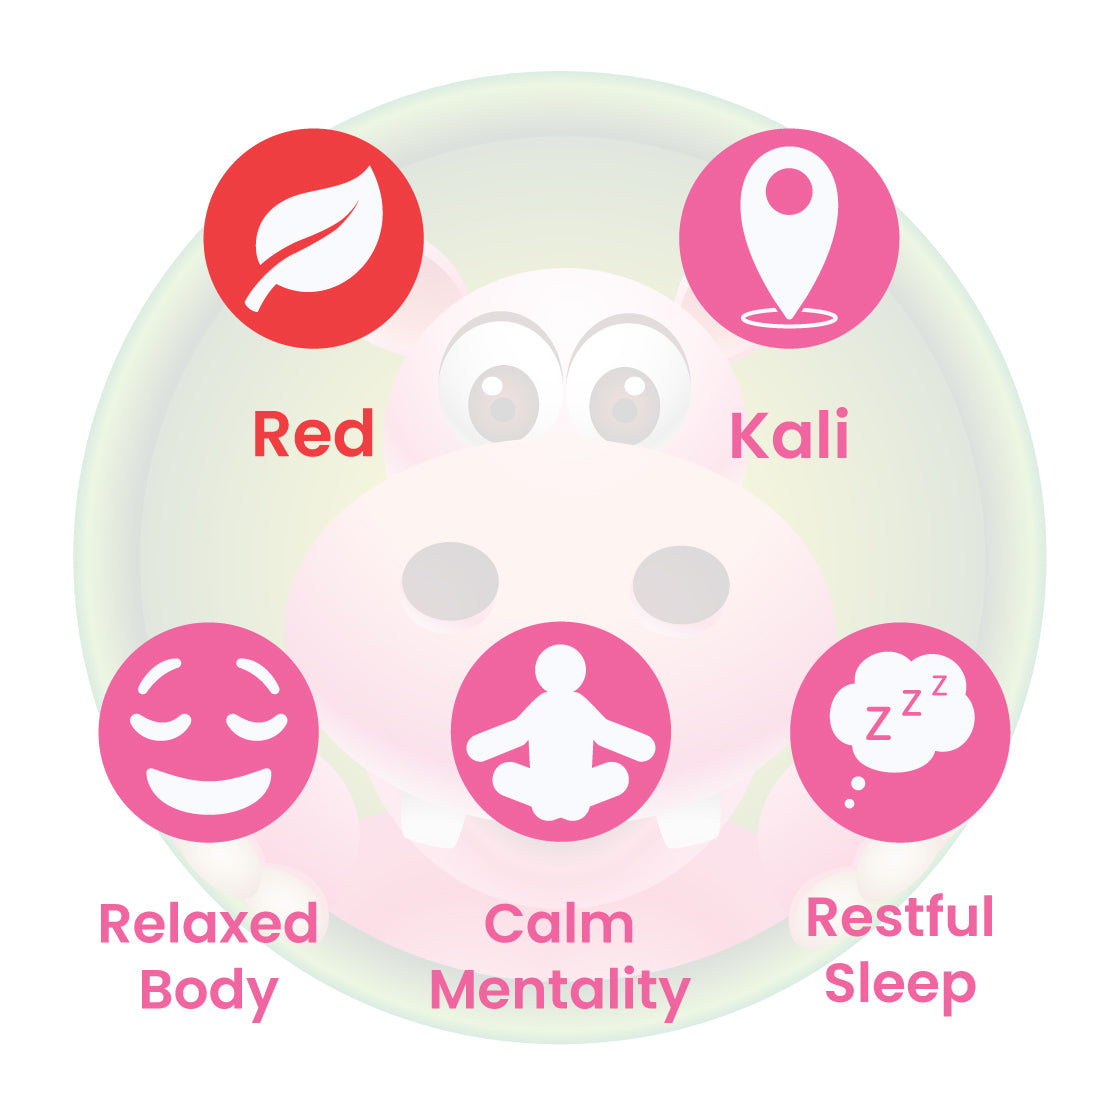 Infographic Details for Happy Hippo Red Vein Kali Kratom Powder. Leaf color: Red Vein. Kratom Strain Origin: Kali. Kratom Effects resonate with Restful Sleep, Calm Mentality, and Physical Relaxation.